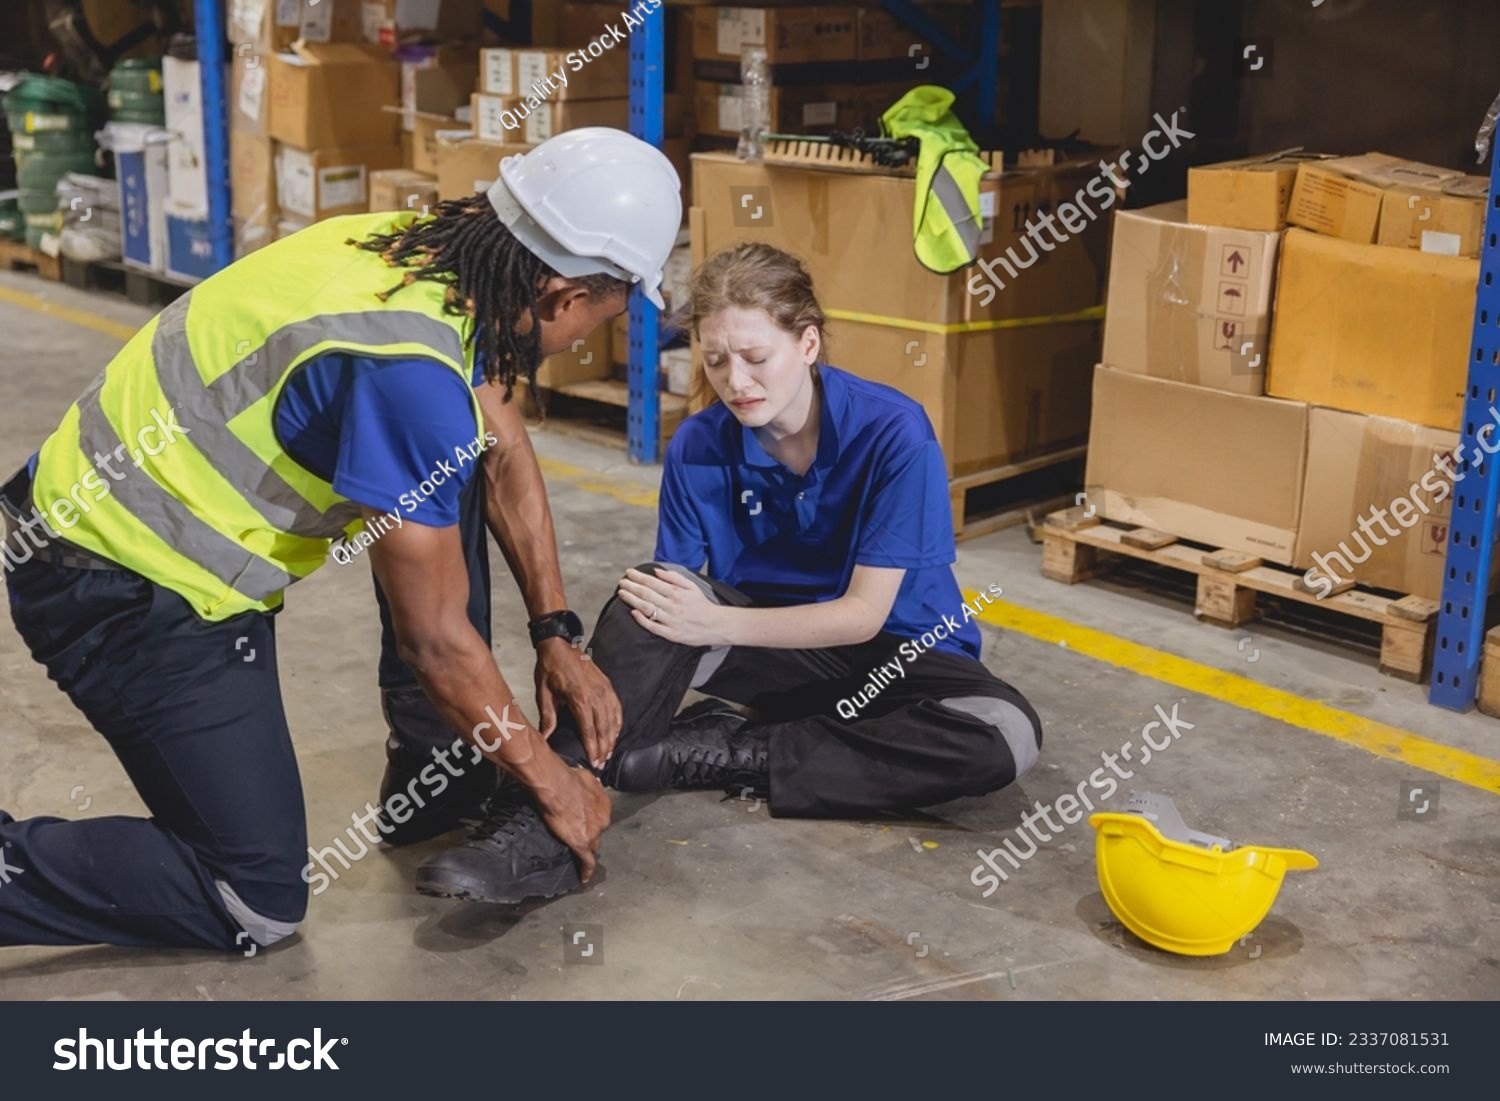 young woman warehouse worker accident leg injury slip and fall ankle sprain friend help support #2337081531